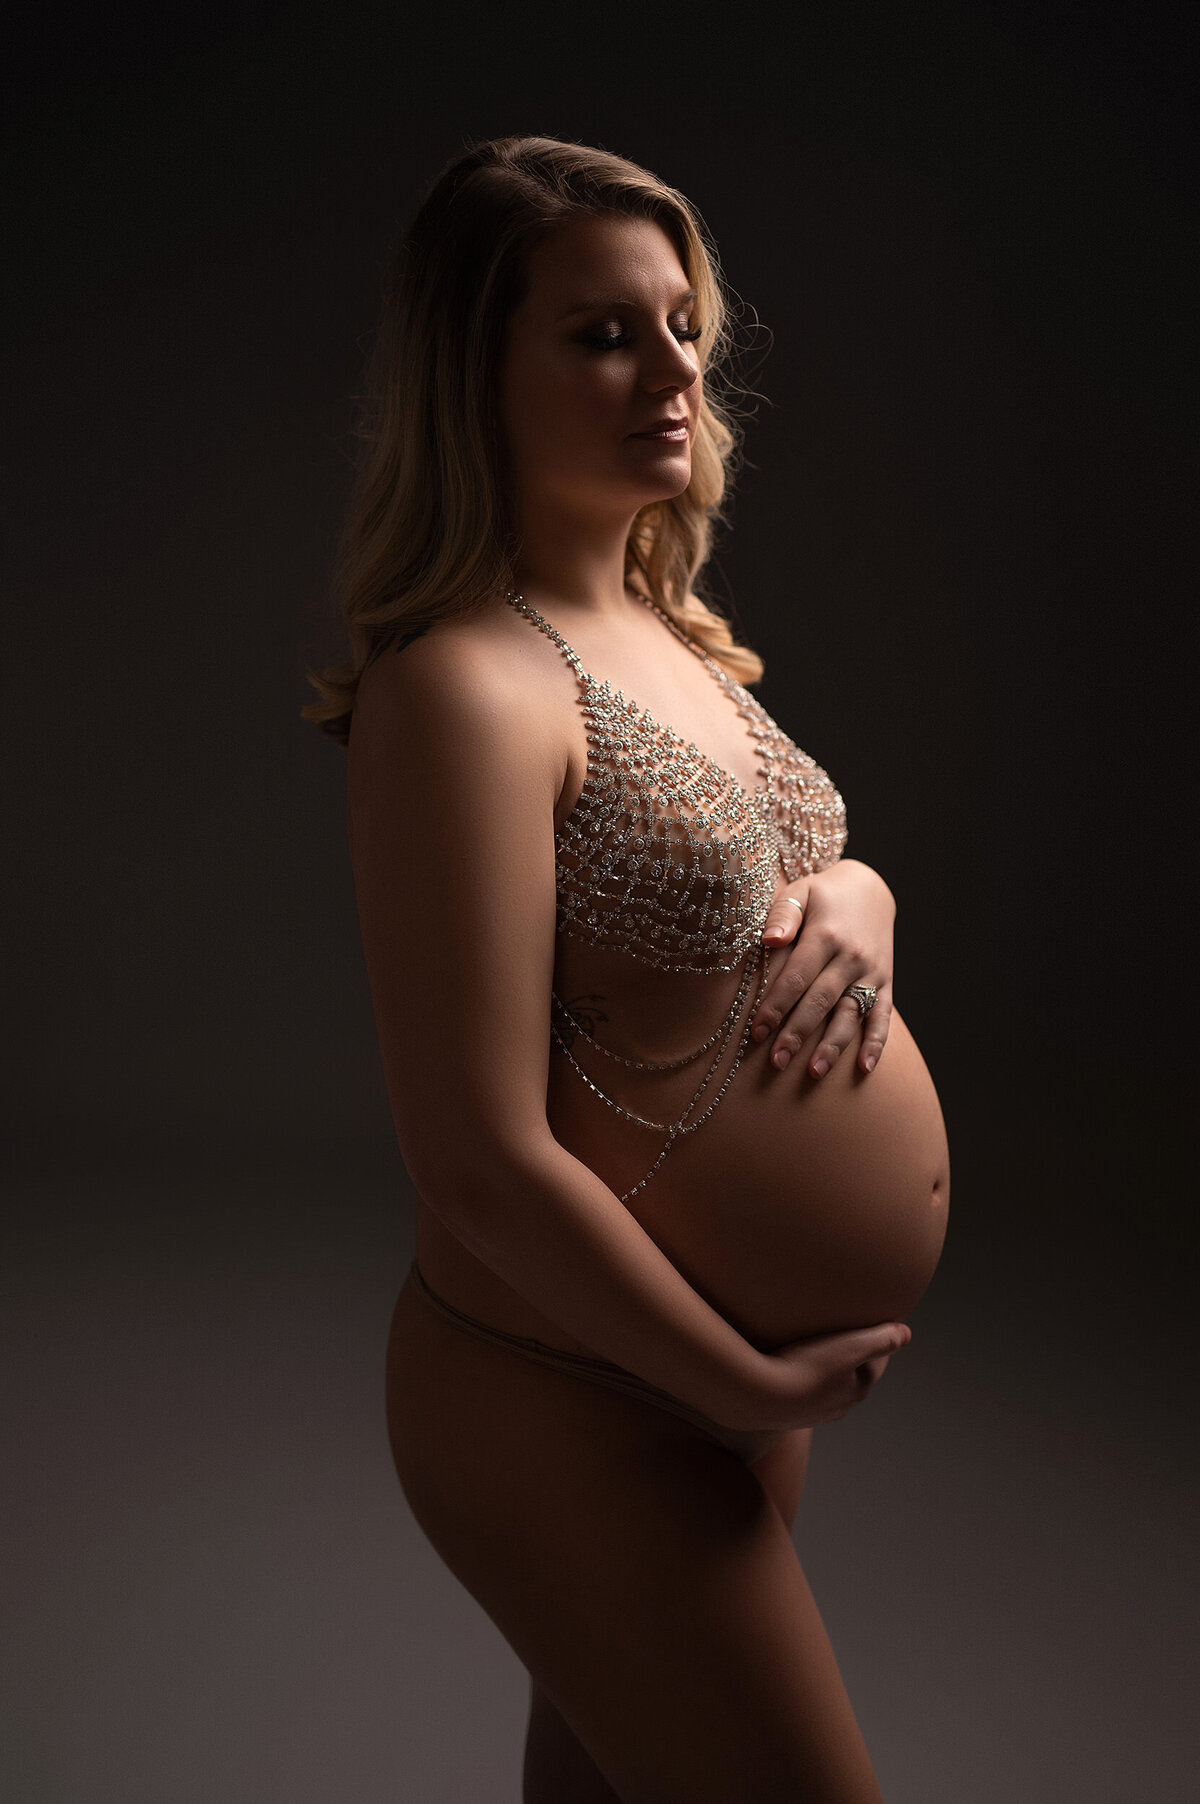 Portrait of a pregnant woman cradleing her belly while wearing beaded lingerie in front of a gray backdrop in our Waukesha studio.